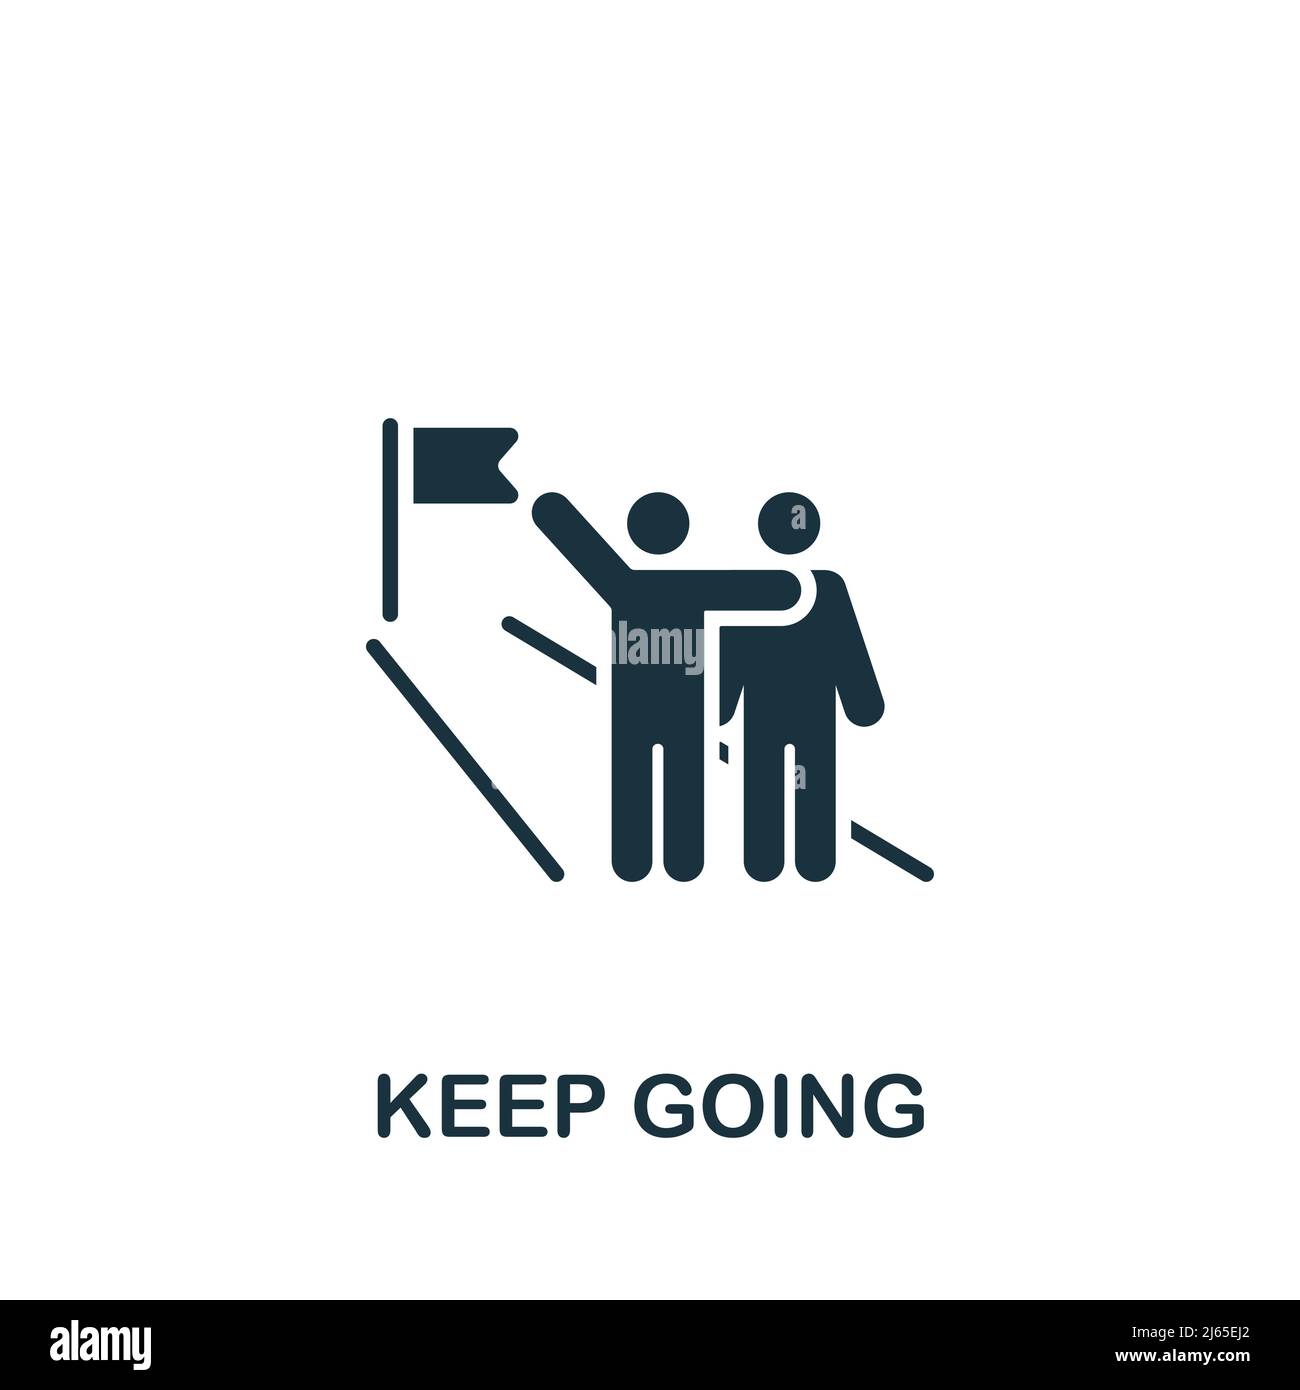 Keep Going icon. Simple line element business motivation symbol ...